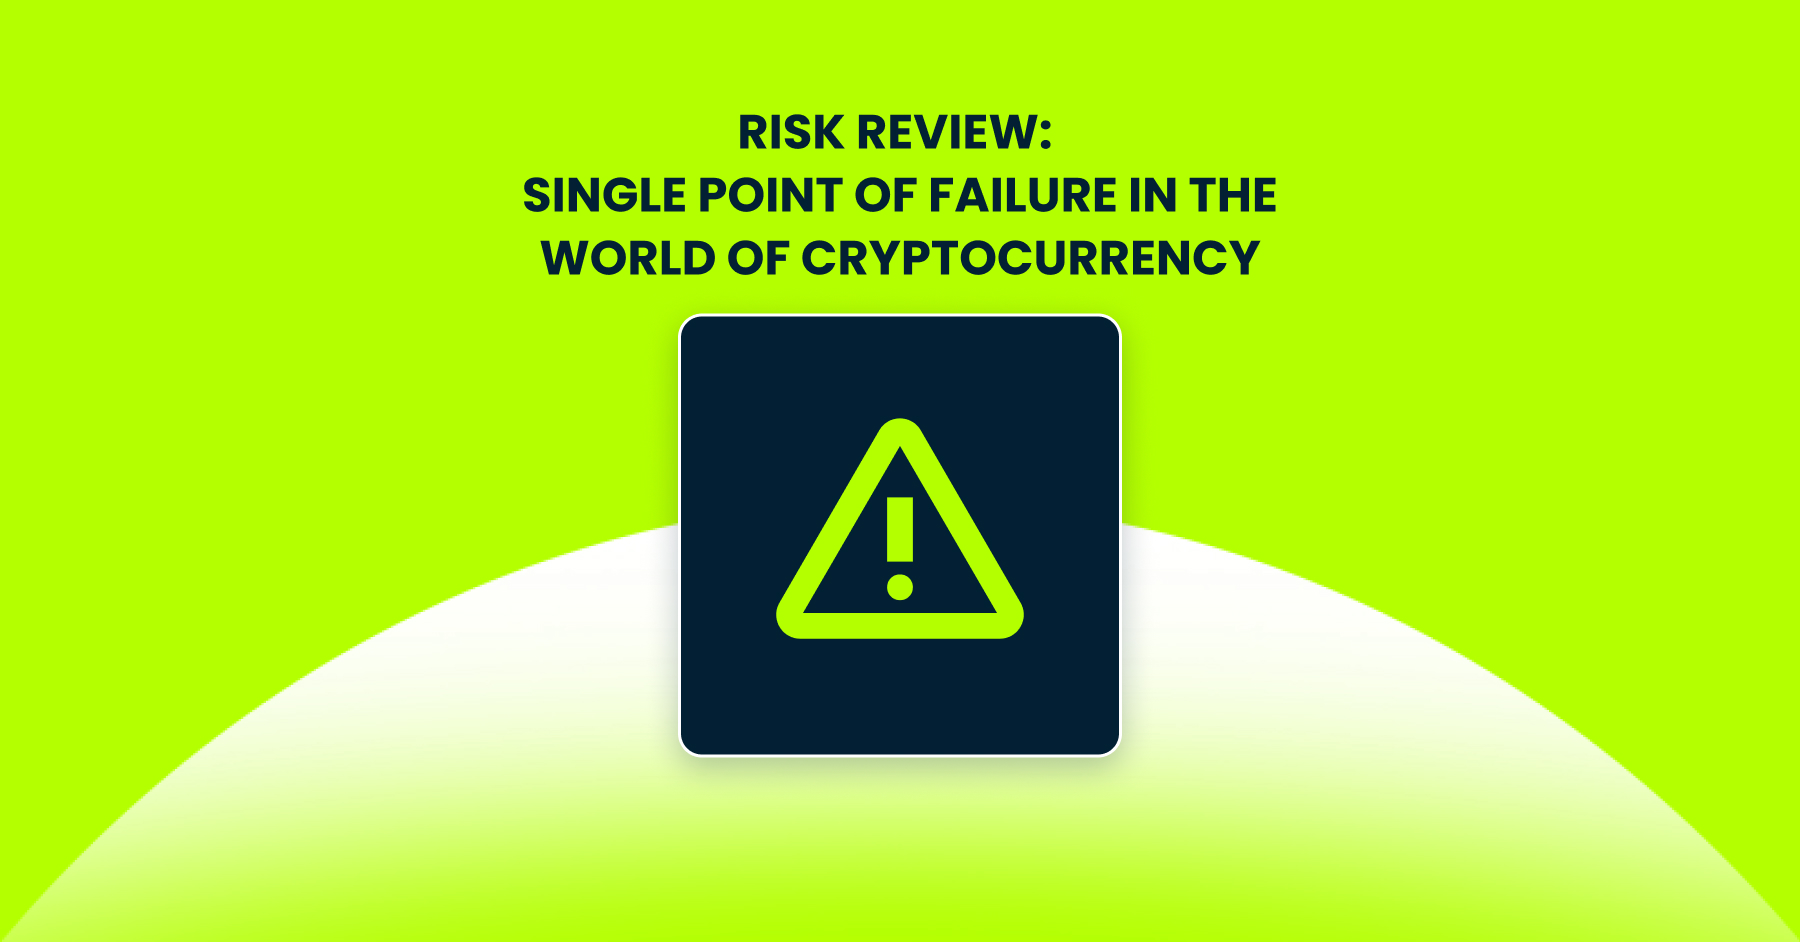 Risk Review: Single Point of Failure in the World of Cryptocurrency